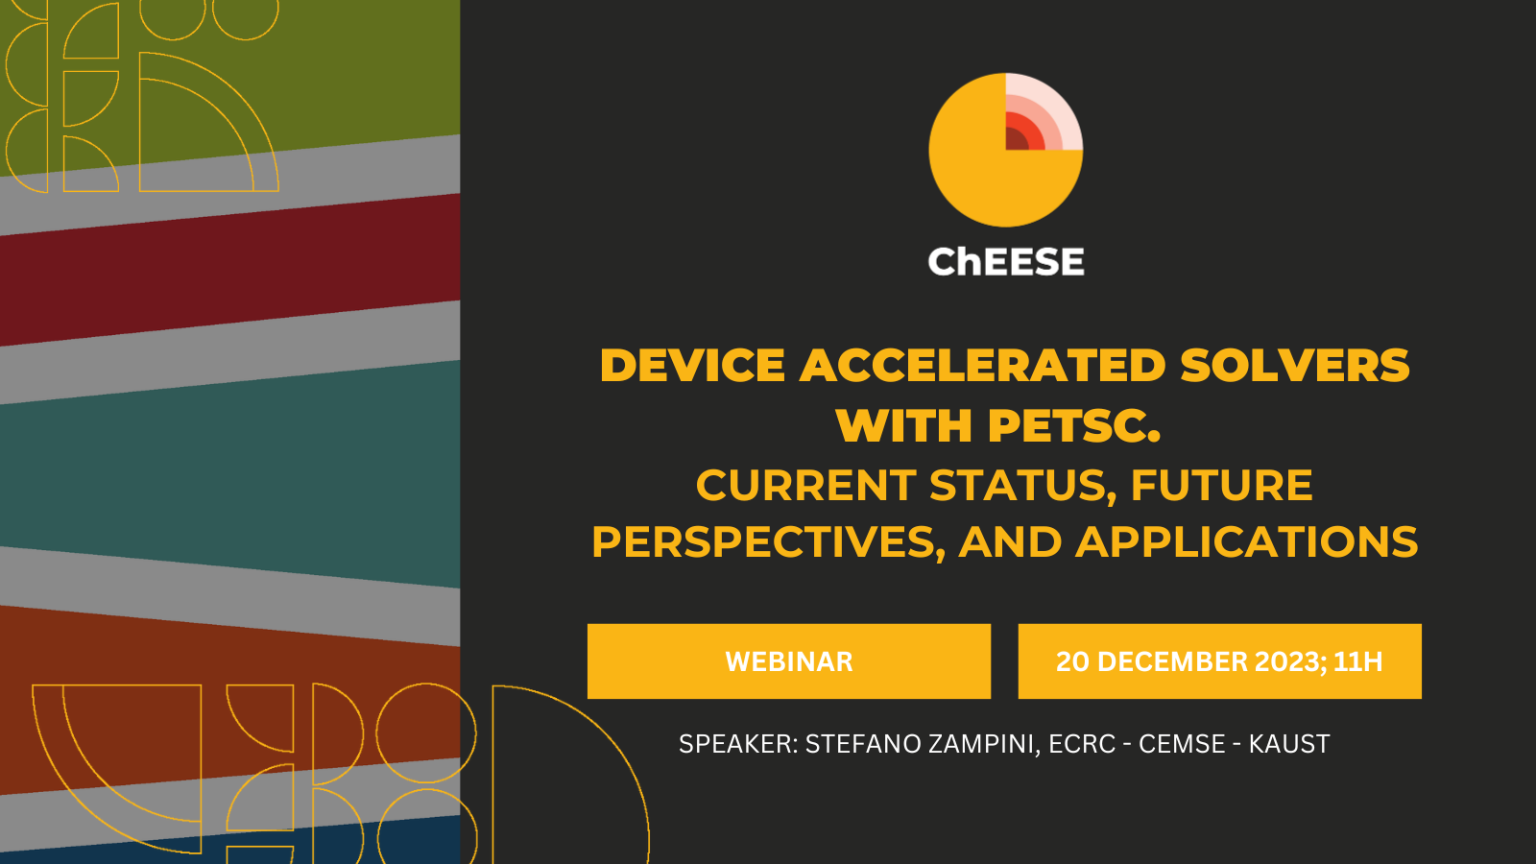 Webinar “Device accelerated solvers with PETSc. Current Status, future perspectives, and applications” December 20th, 11:00 CET, online, organized by CoE ChEESE